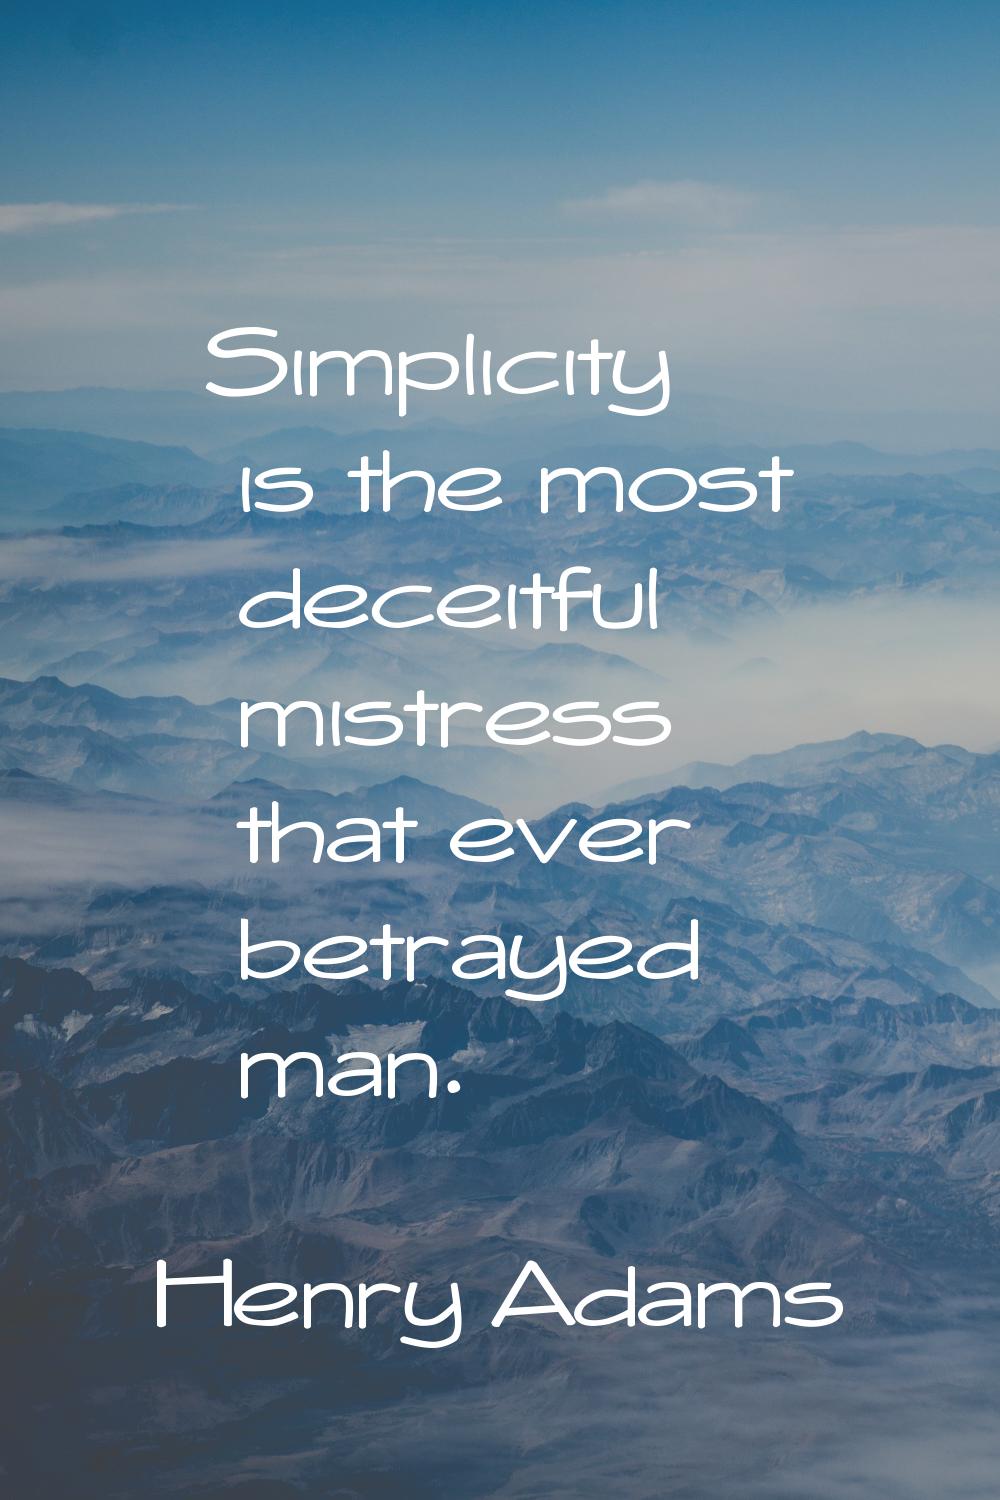 Simplicity is the most deceitful mistress that ever betrayed man.